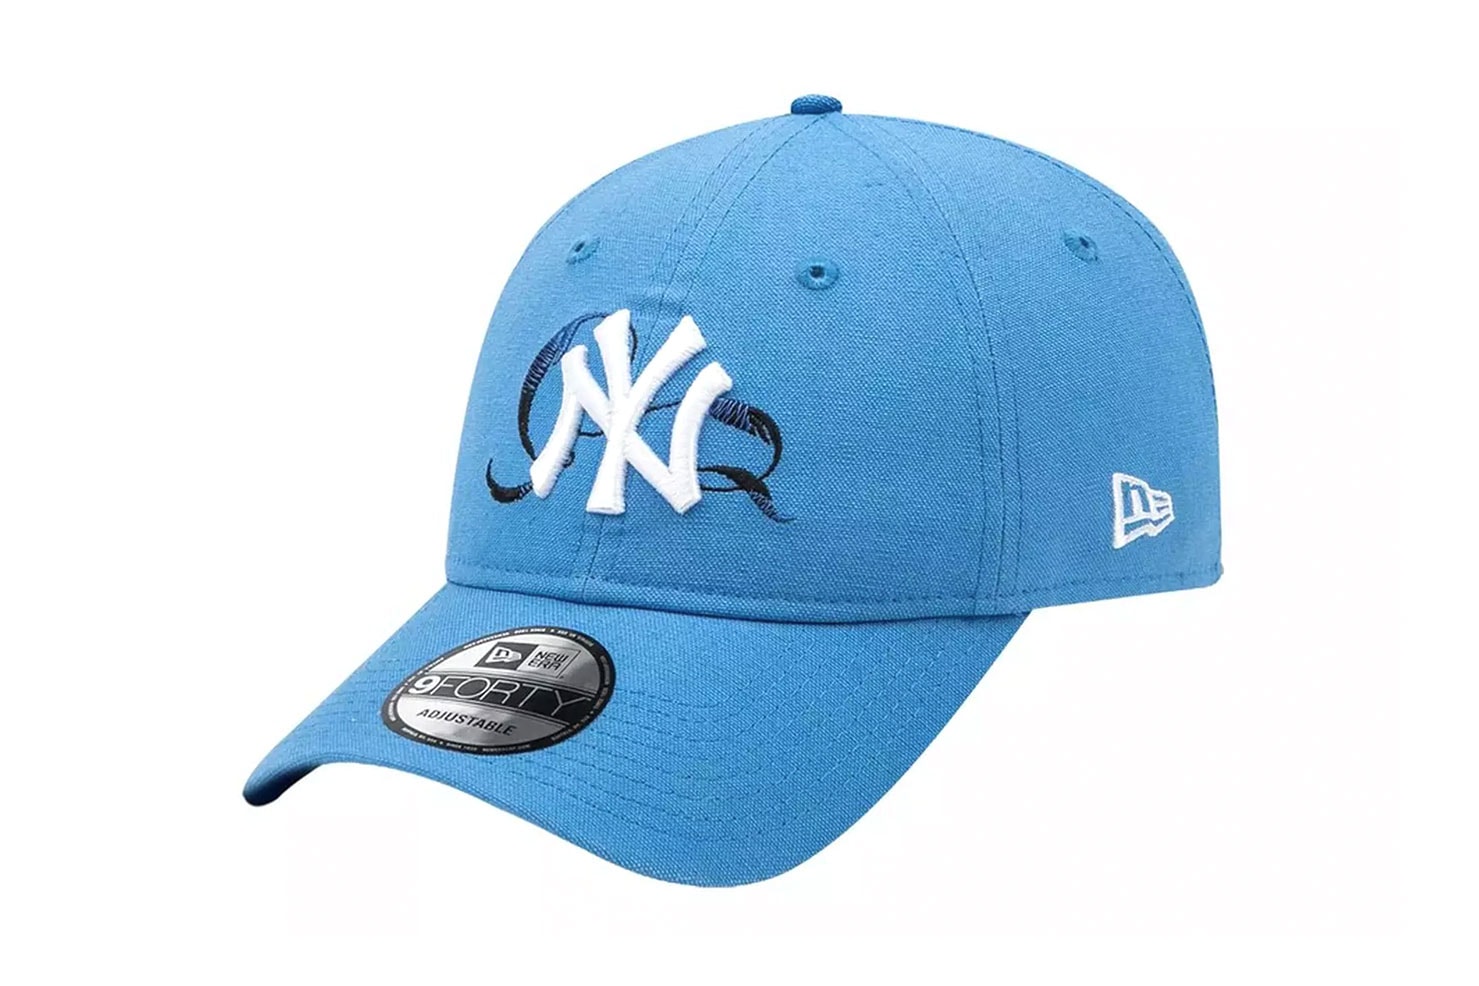 BTS x MLB x New Era® のトリプルコラボコレクションが発表 BTS Reveals Three-Way Collaboration With MLB and New Era Offering album themed Yankees Red Sox Dodgers gear t shirt cap bucket hat butter dynamite black swan release info date price 